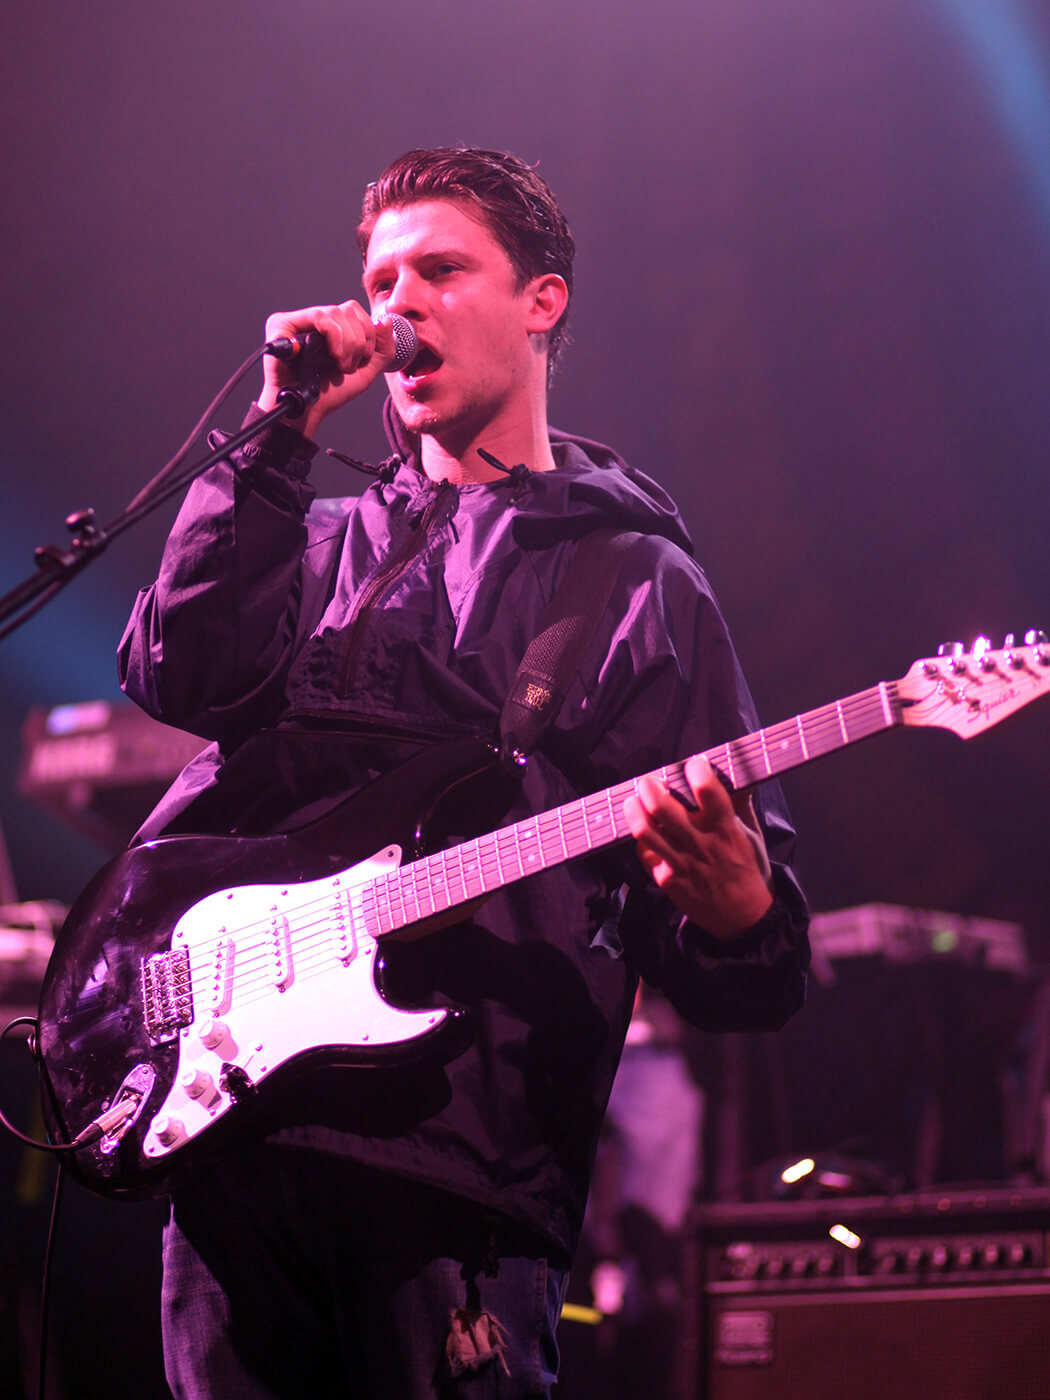 Jamie T performing with a Squier Stratocaster in 2010 by Harry Herd/Redferns via Getty Images